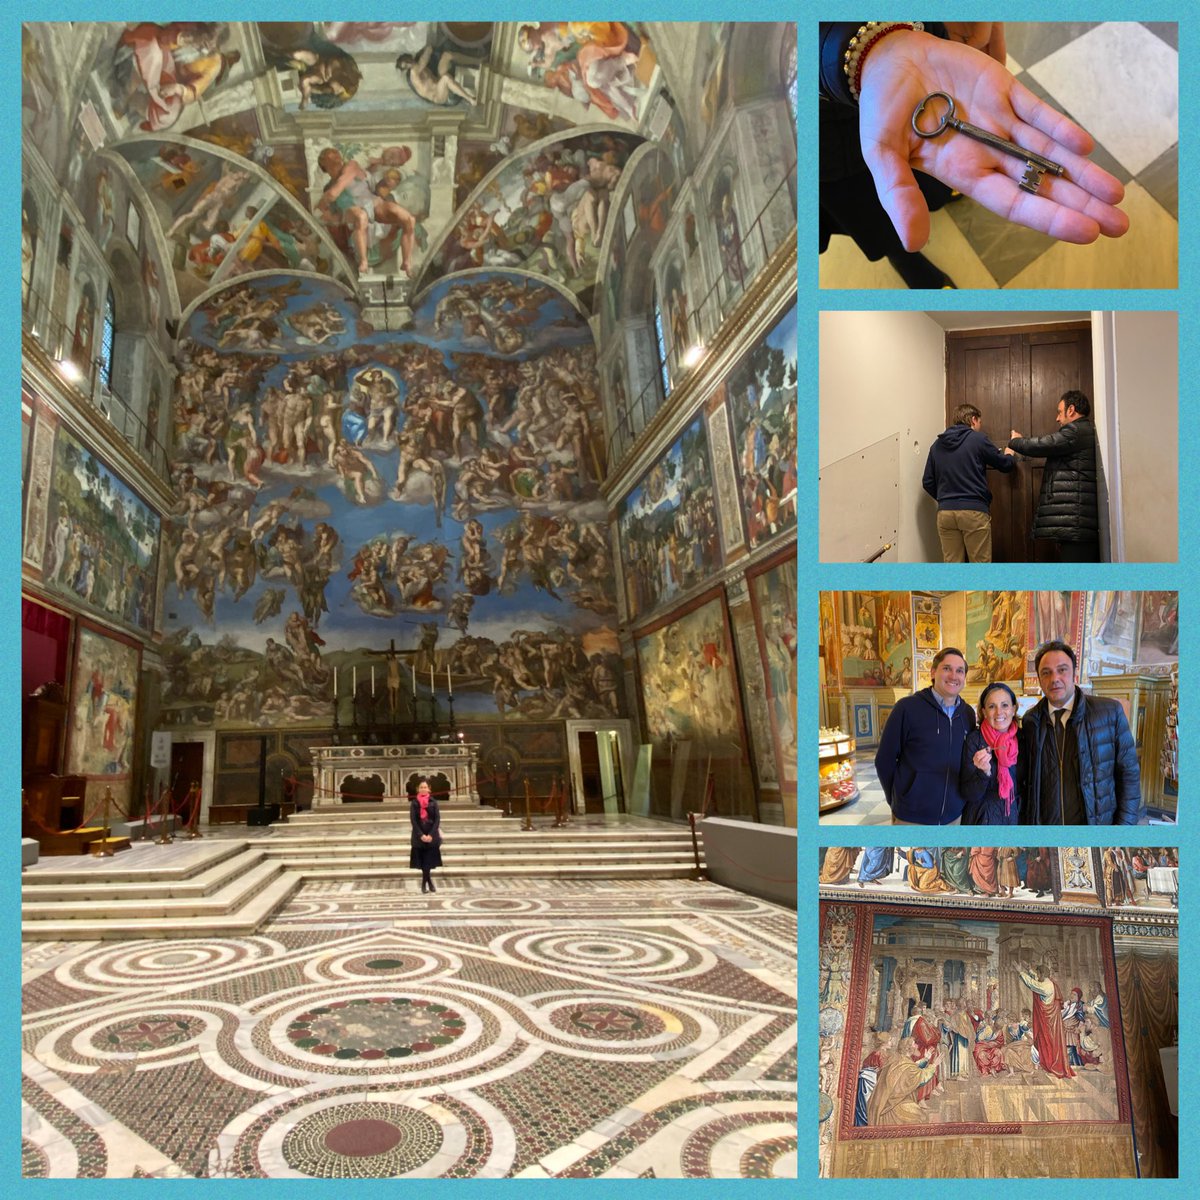 “I live and love in God's peculiar light. ” ~Michelangelo #Justblessed🇮🇹 #Grazie🙏🏻 #KeyKeepers #giannicrea🔑#Nico🎶🔑& our guide #DanielaPasquali 💫 #Raphaeltapestries @sistene_chapel #Iheldthekey🔑☺️ #3daysinRome #Fillyourheart✝️